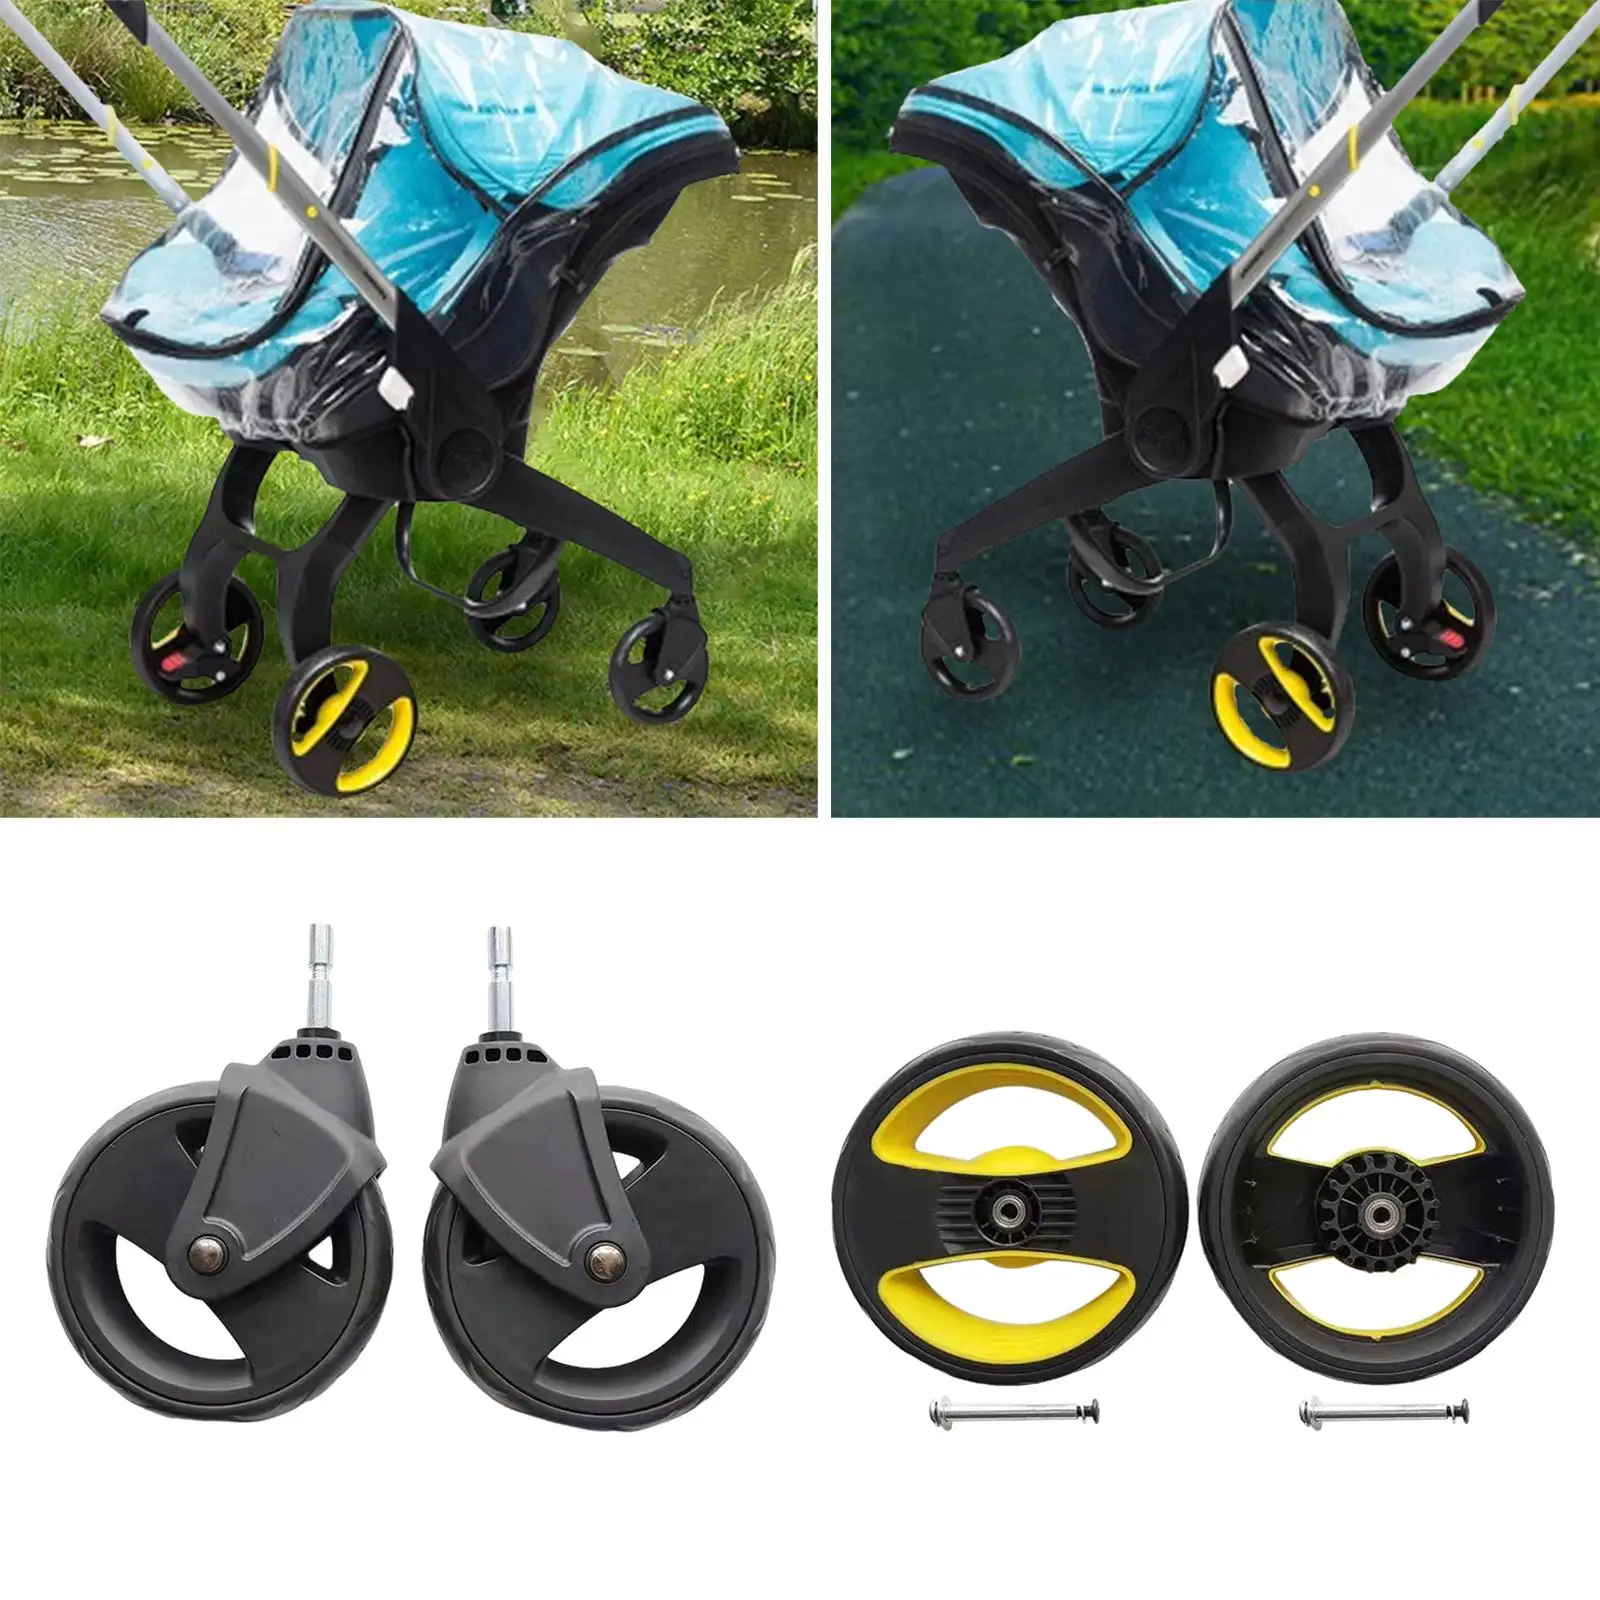 Trolley Wheel Accs Spare Parts Repairing Upgrade Parts Pram for Kids Carriage Swivel Wheel Wheel Replacement 2Pcs Trolley